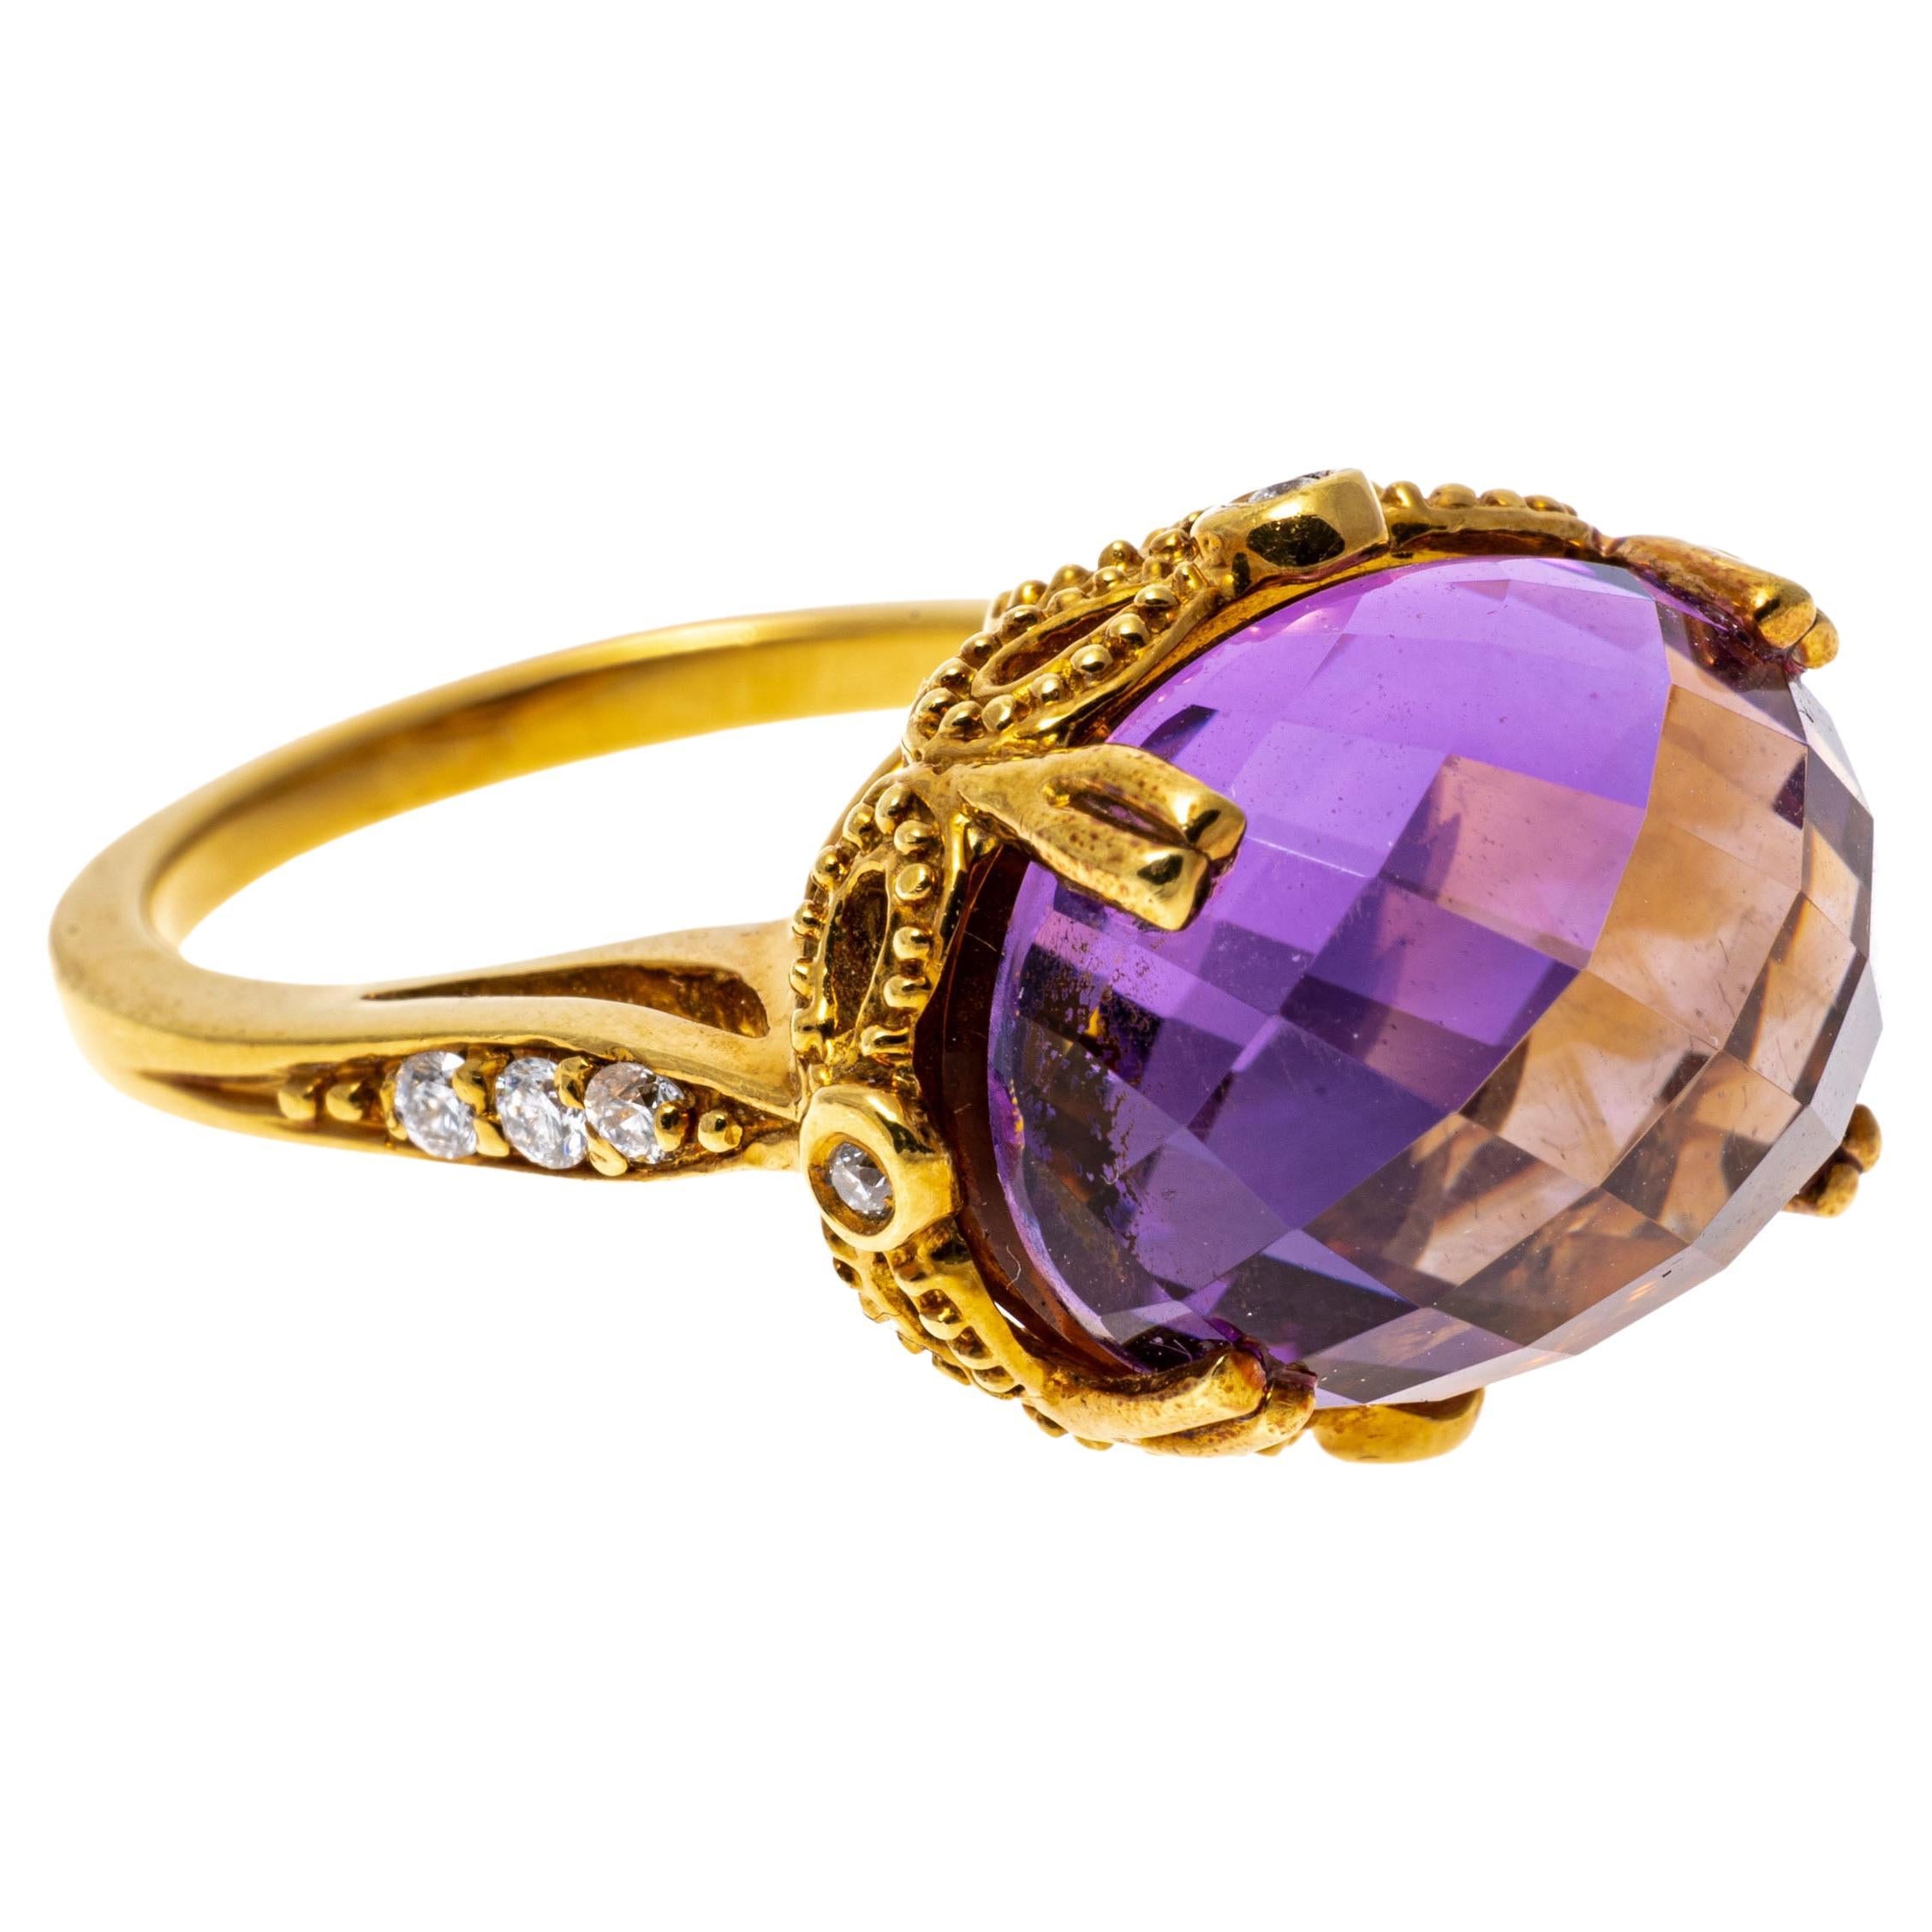 14k Yellow Gold Mirror Image Amethyst and Citrine Ring with Diamonds